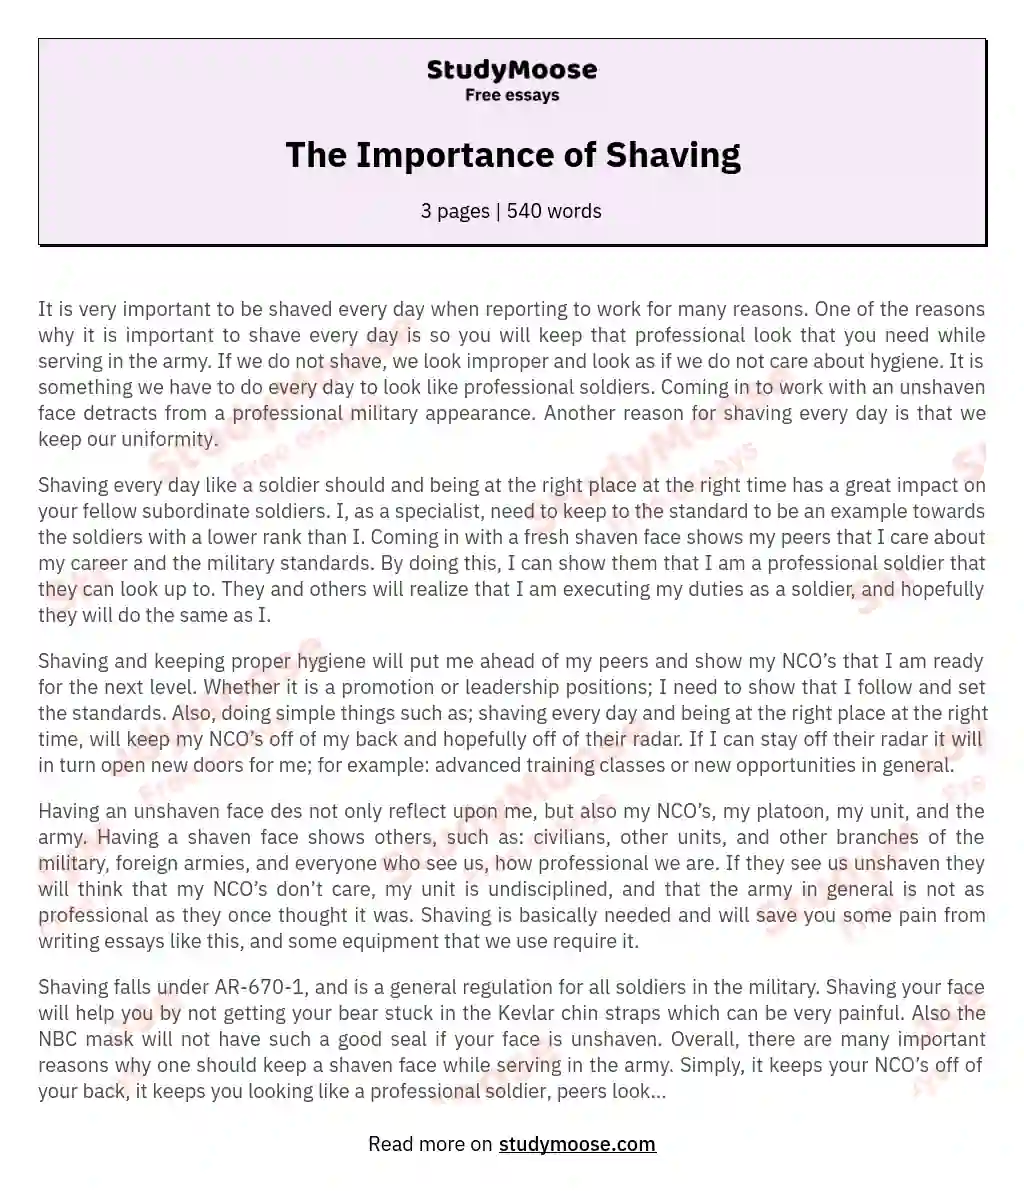 importance of shaving in the military